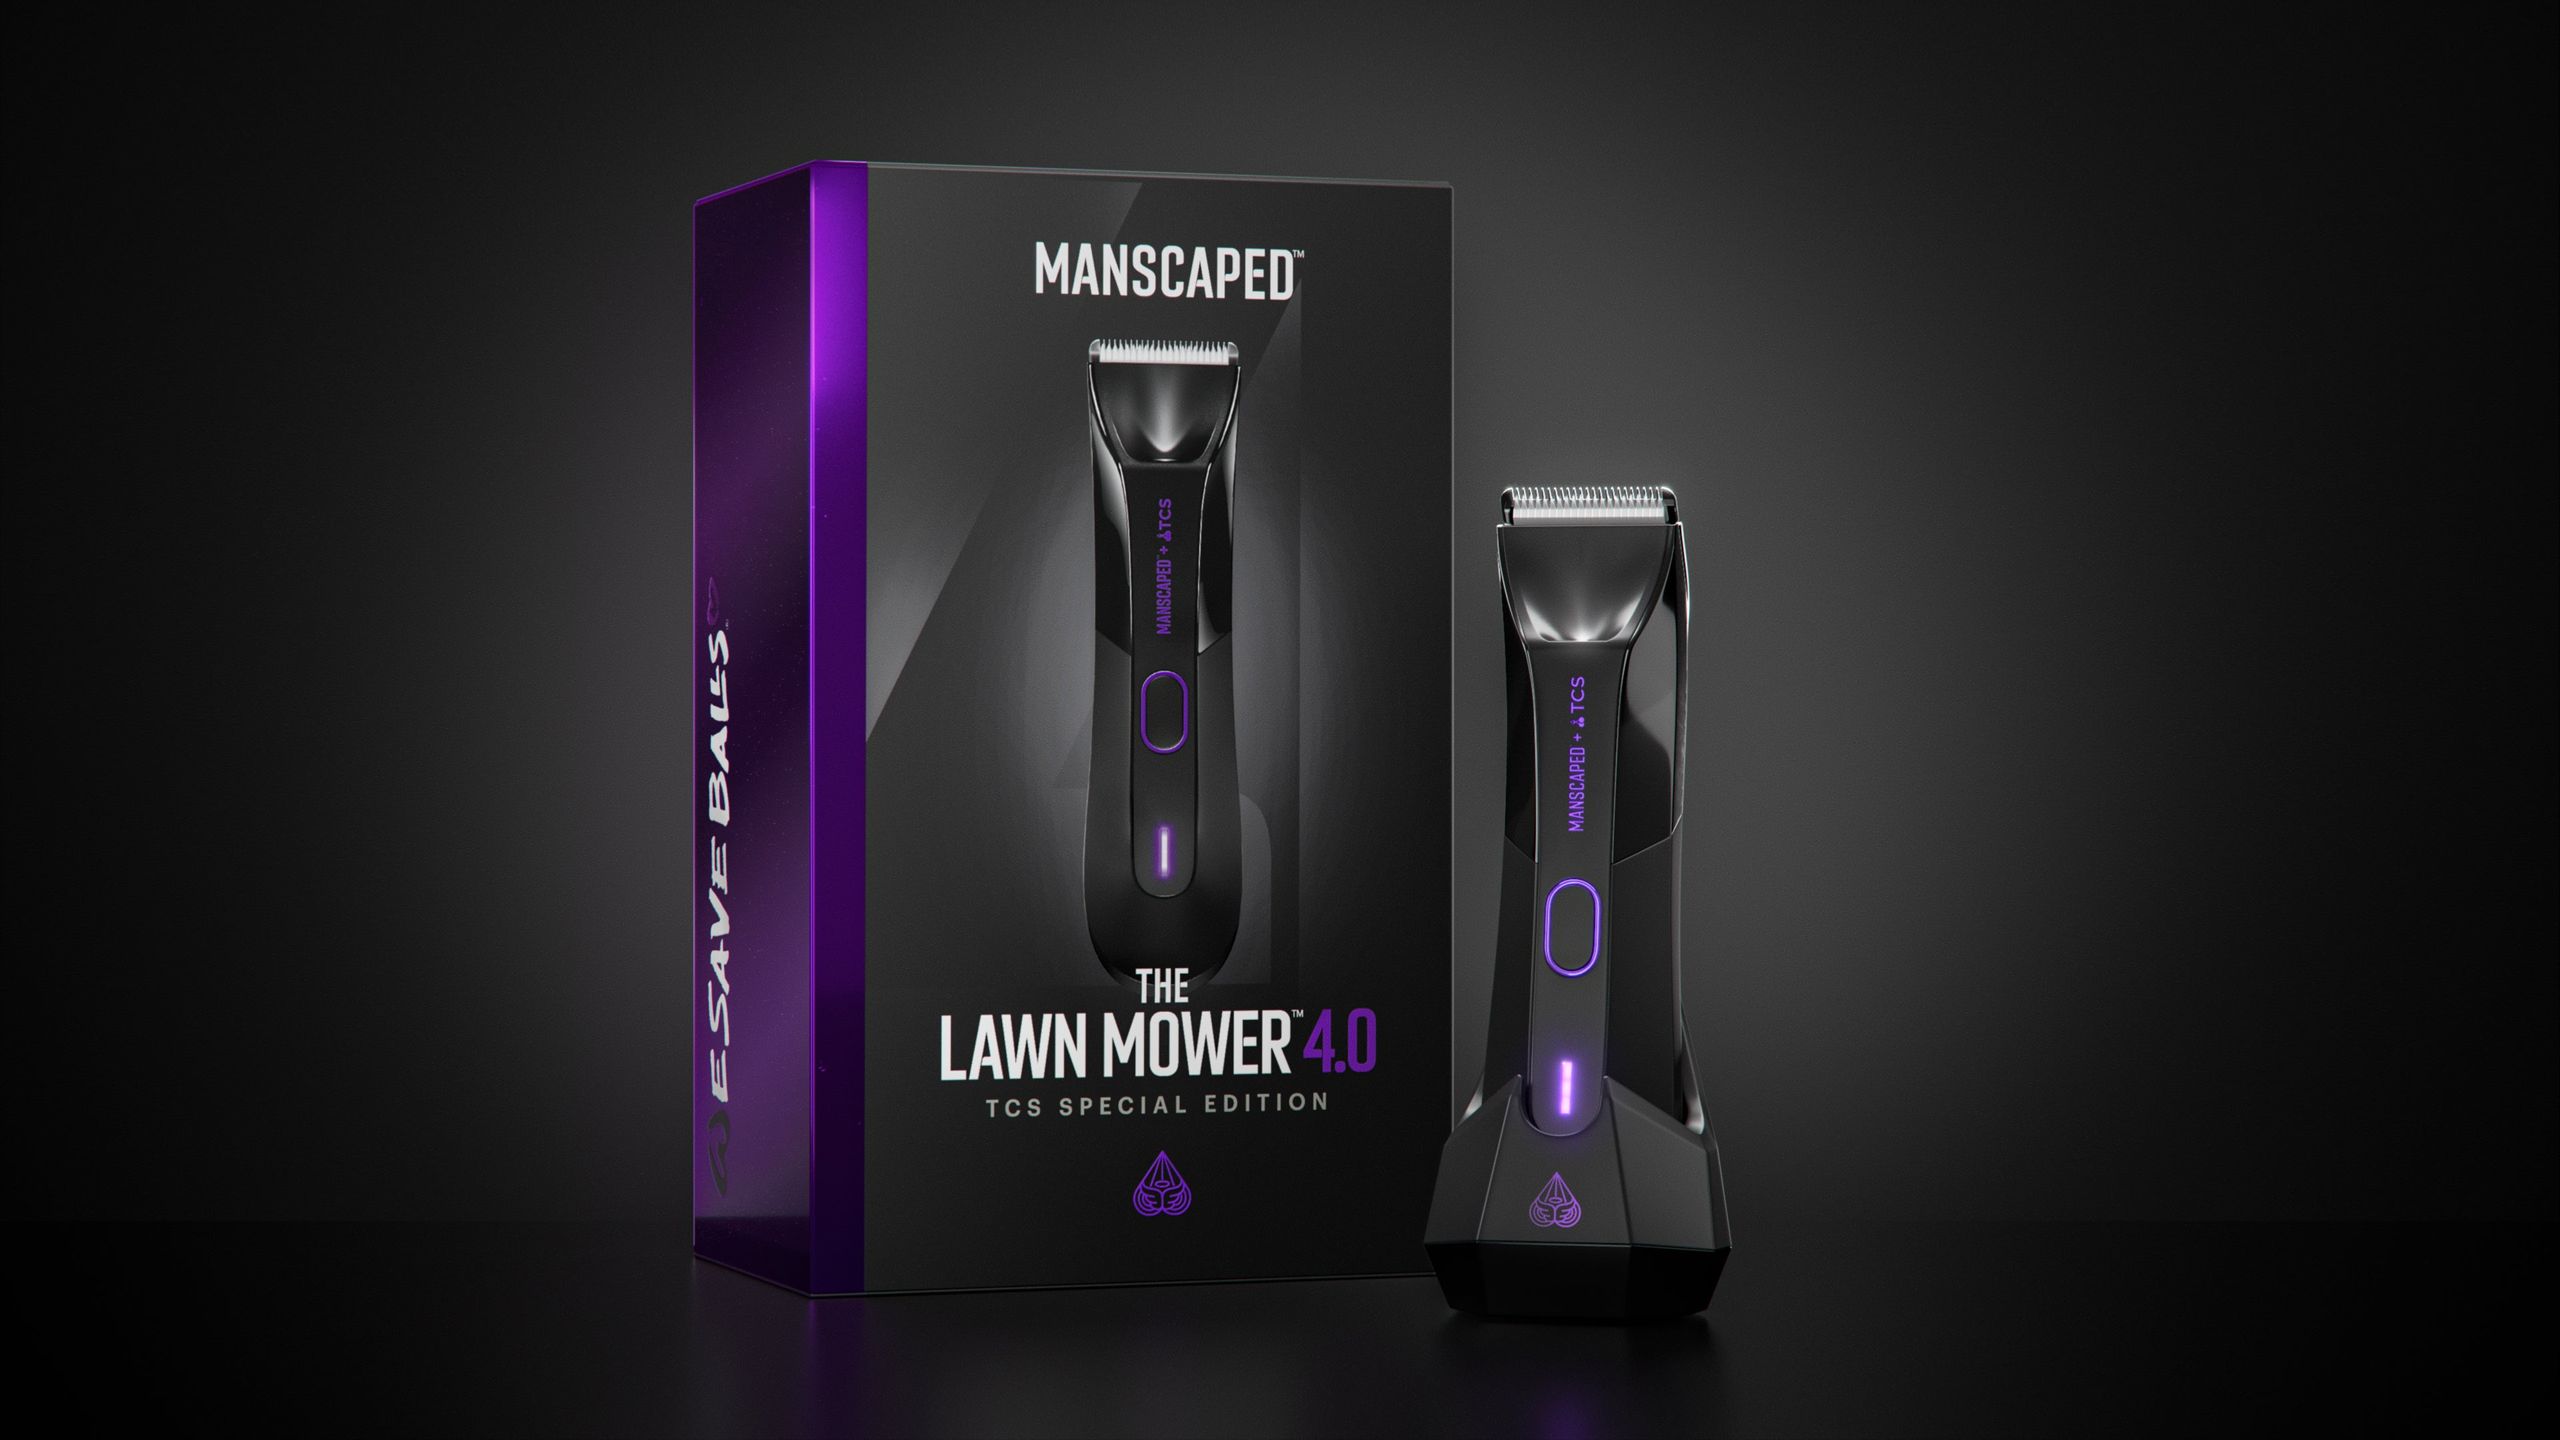 MANSCAPED™ Launches The Lawn Mower® 4.0 TCS Special Edition Trimmer in Support of Testicular Cancer Awareness